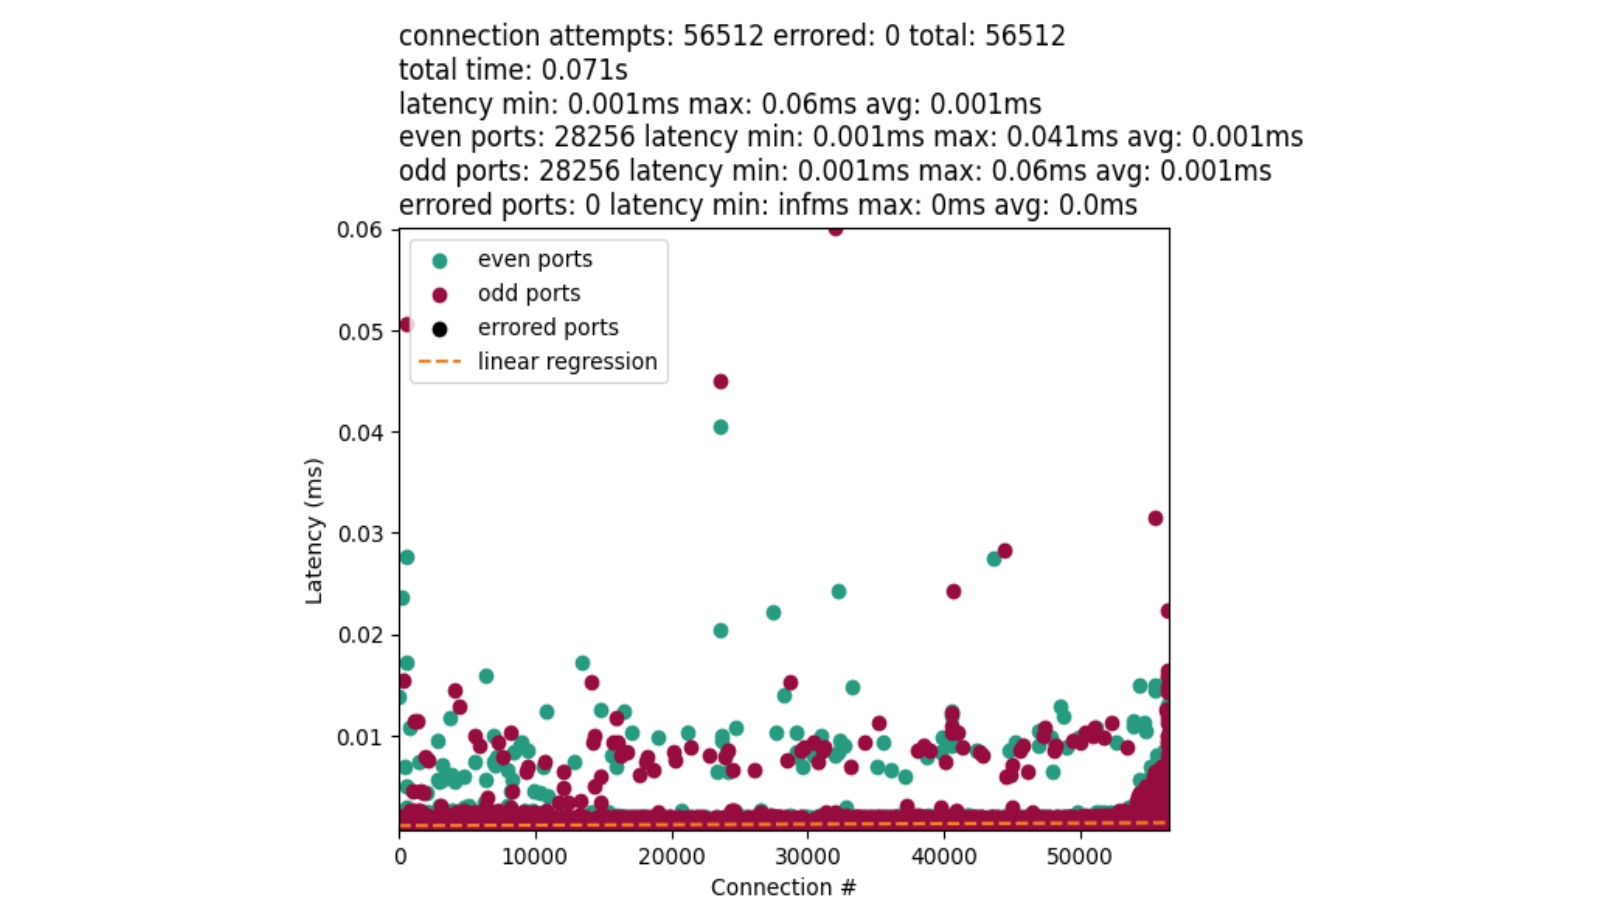 Figure 9: A detailed chart representing a flat-linear distribution of port-finding speeds. Out of 56,512 connections the average time spent finding an even port is 0.001 milliseconds while we see 0.001 milliseconds on average for odd ports. There are no errors.